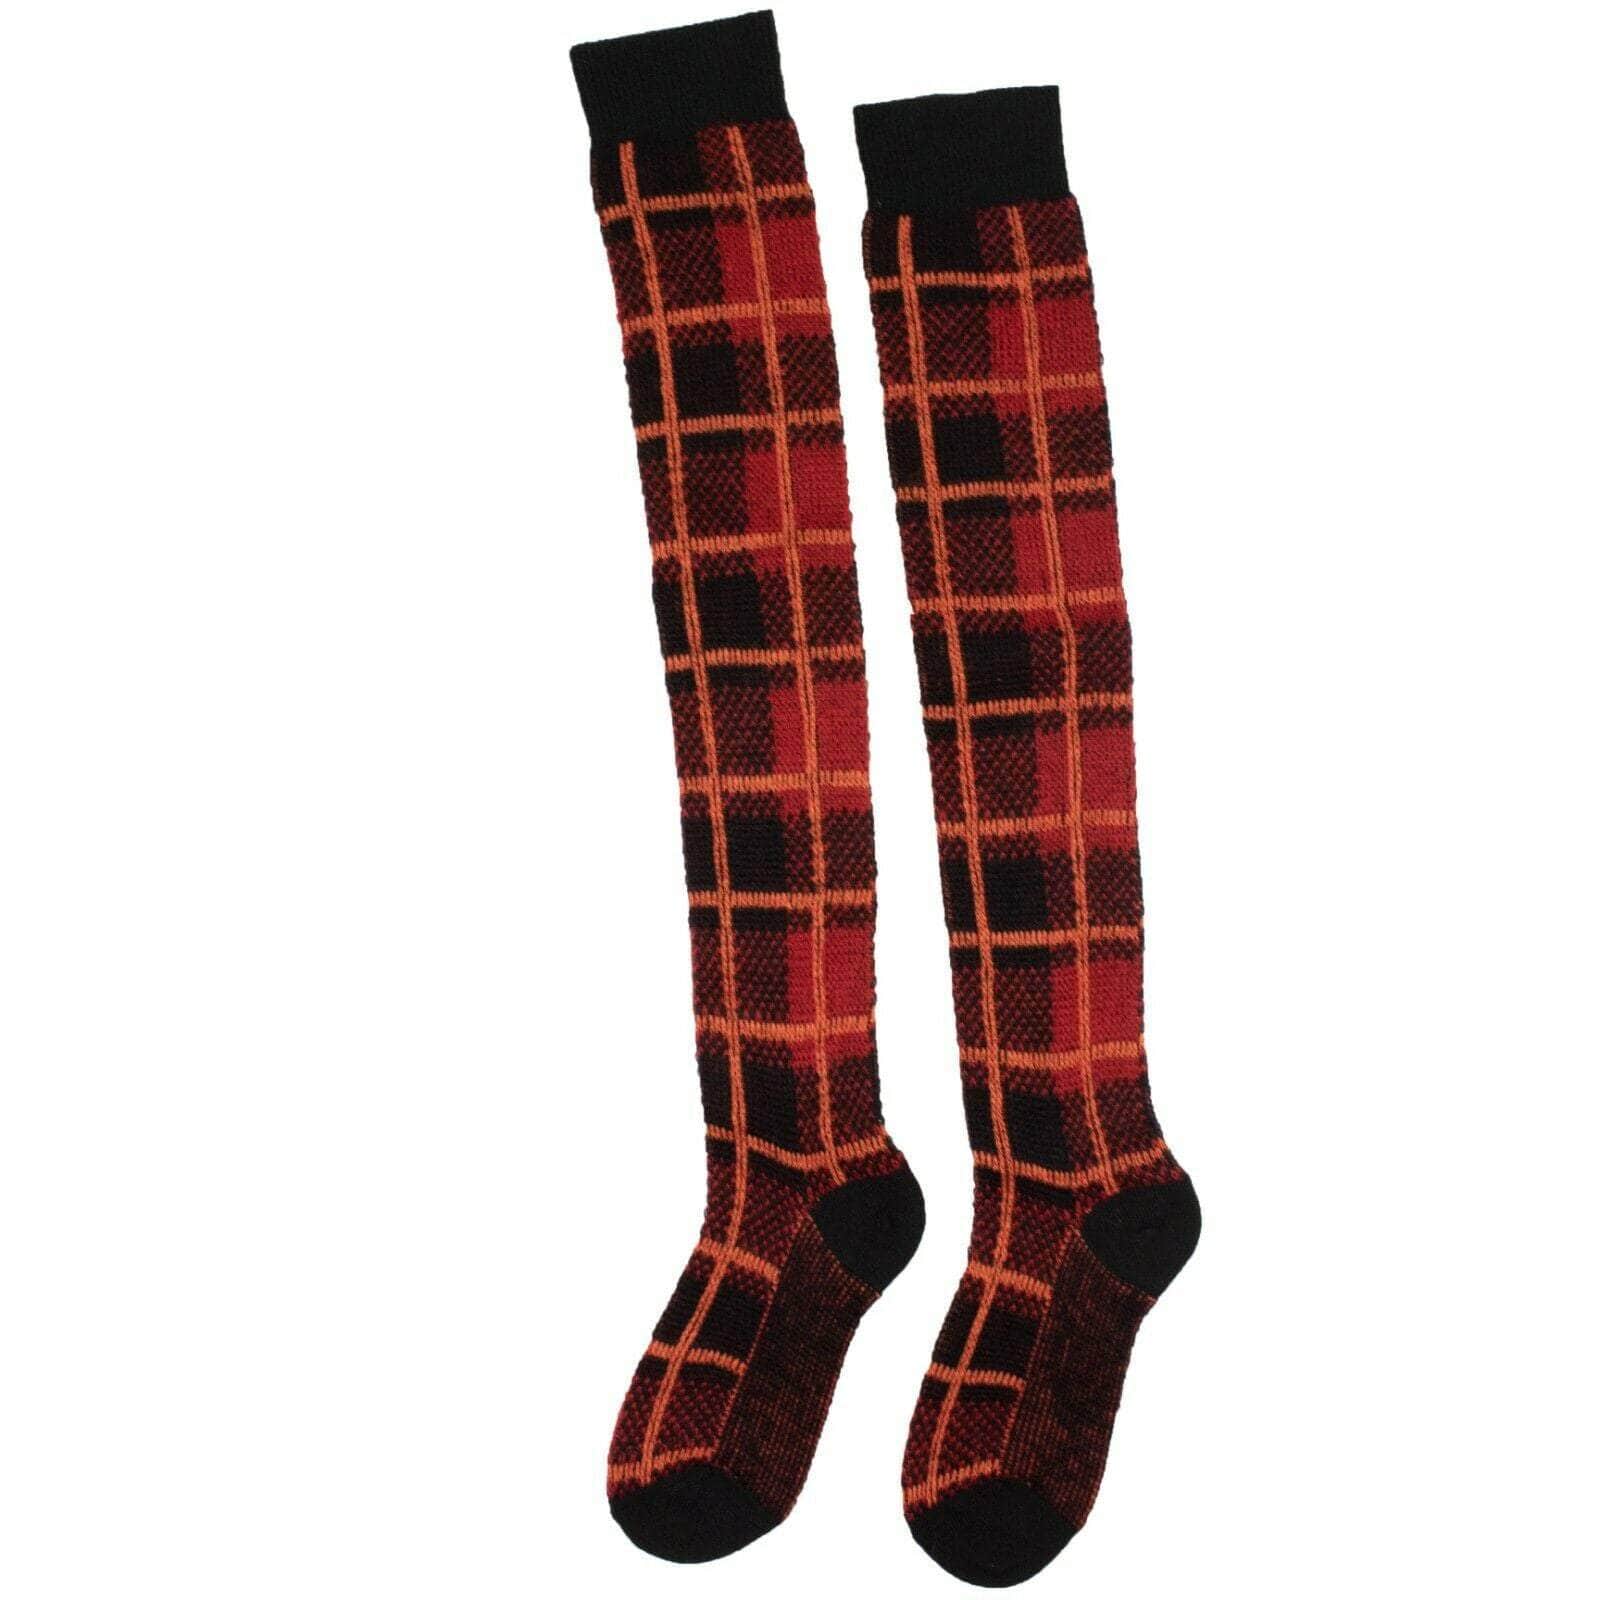 UNRAVEL PROJECT channelenable-all, couponcollection, gender-womens, main-accessories, sale-enable, size-sm, under-250, unravel-project, womens-socks SM Red Wool Checkered Over Knee Socks 82NGG-UN-3009/SM 82NGG-UN-3009/SM